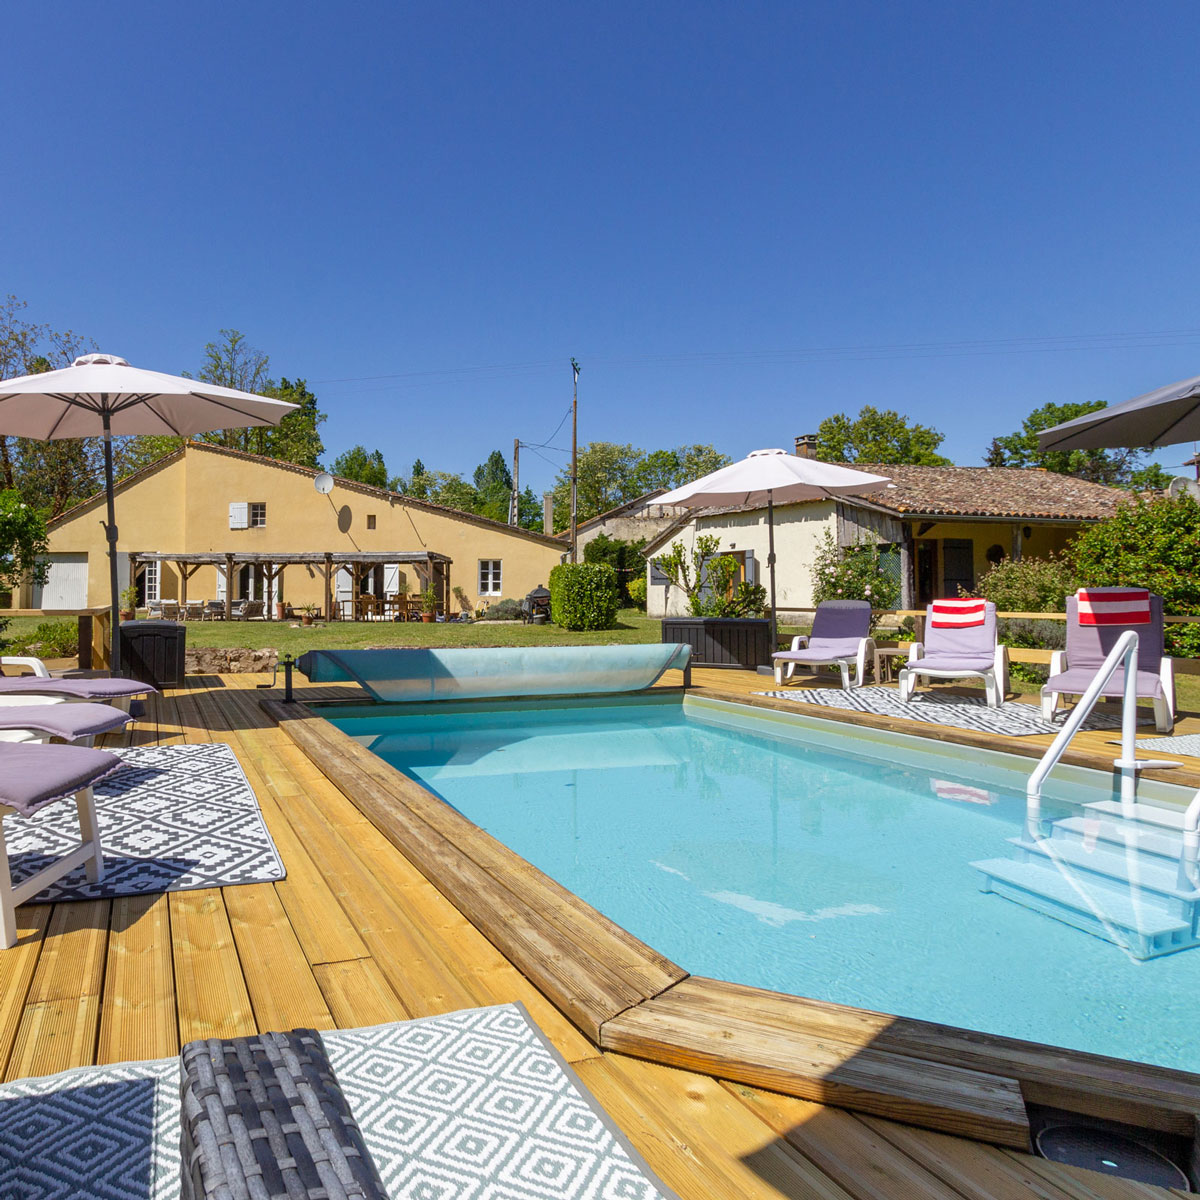 Trespontets holiday villa in SW France near Duras and Monsegur with a private heated swimming pool